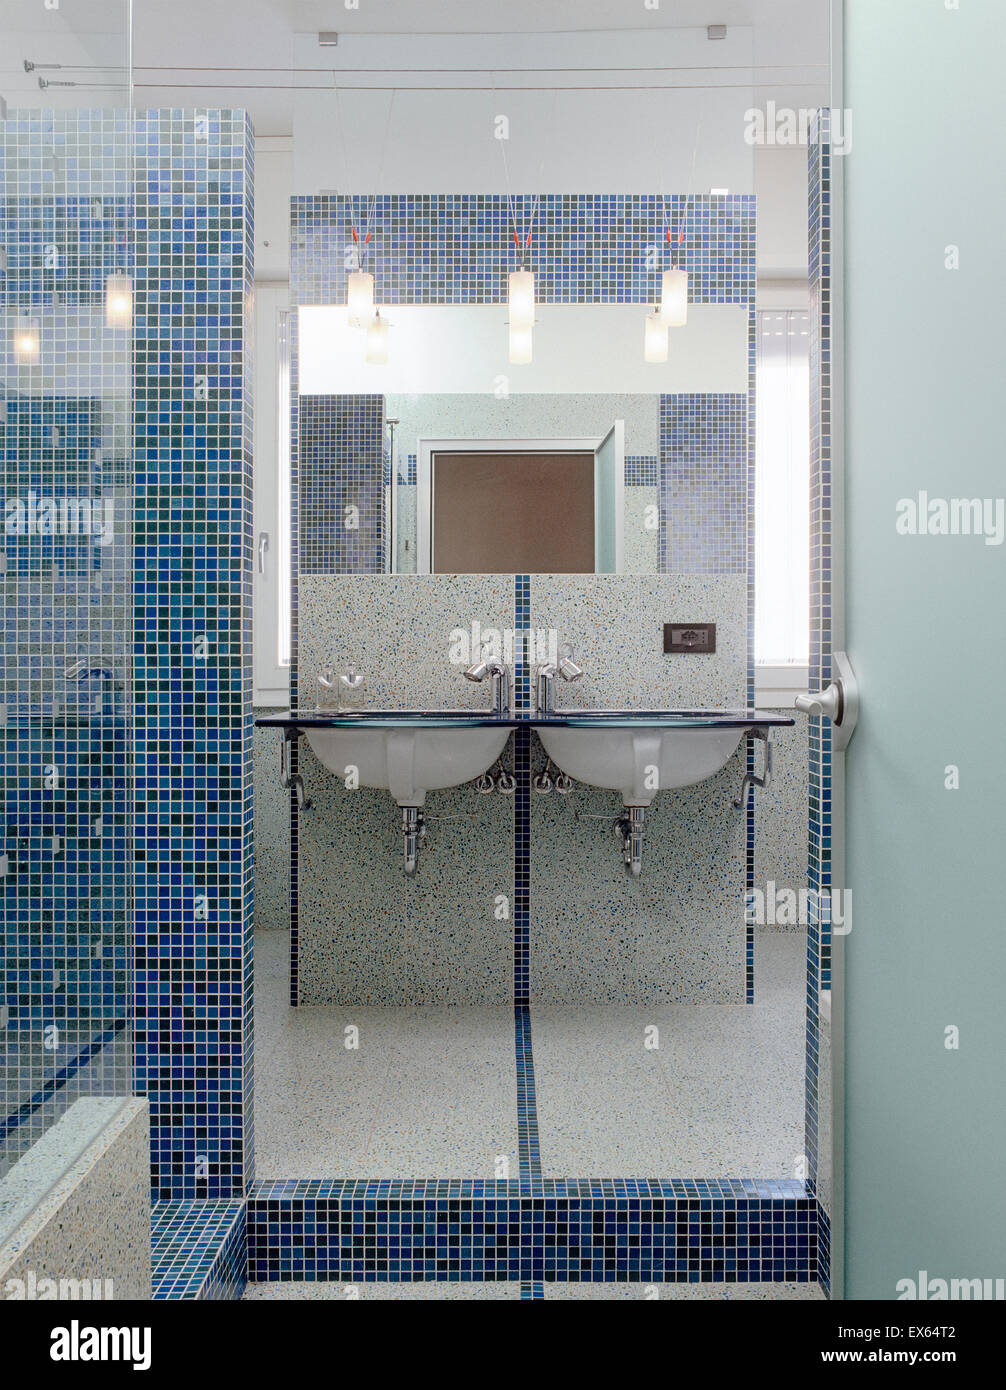 detail of a bathtub in the modern bathroom whose wall and floor are coated with mosaic tiles Stock Photo